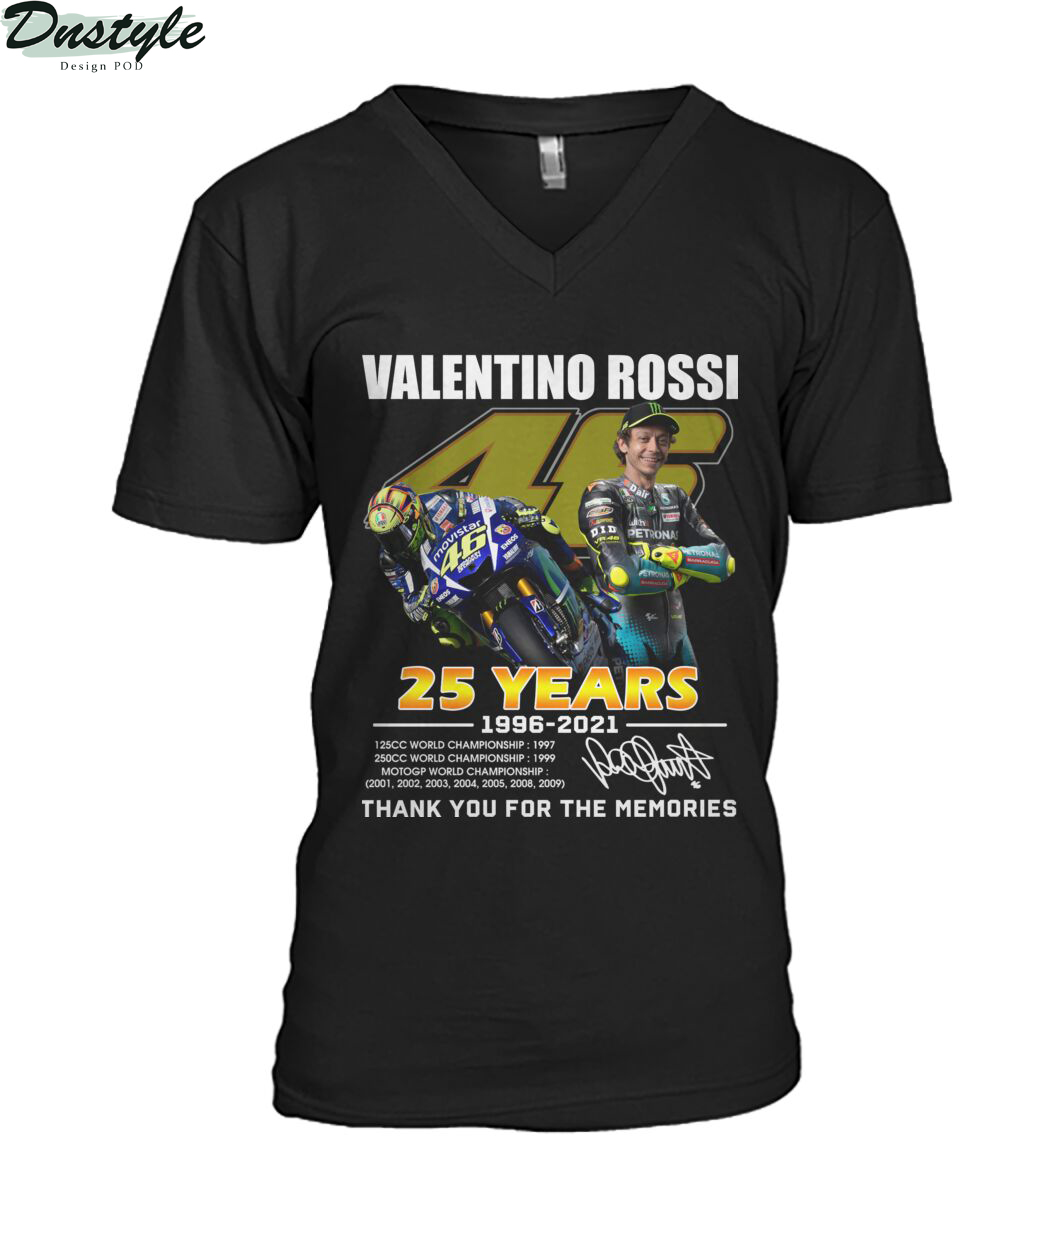 Valentino rossi 25 years thank you for the memories v-neck